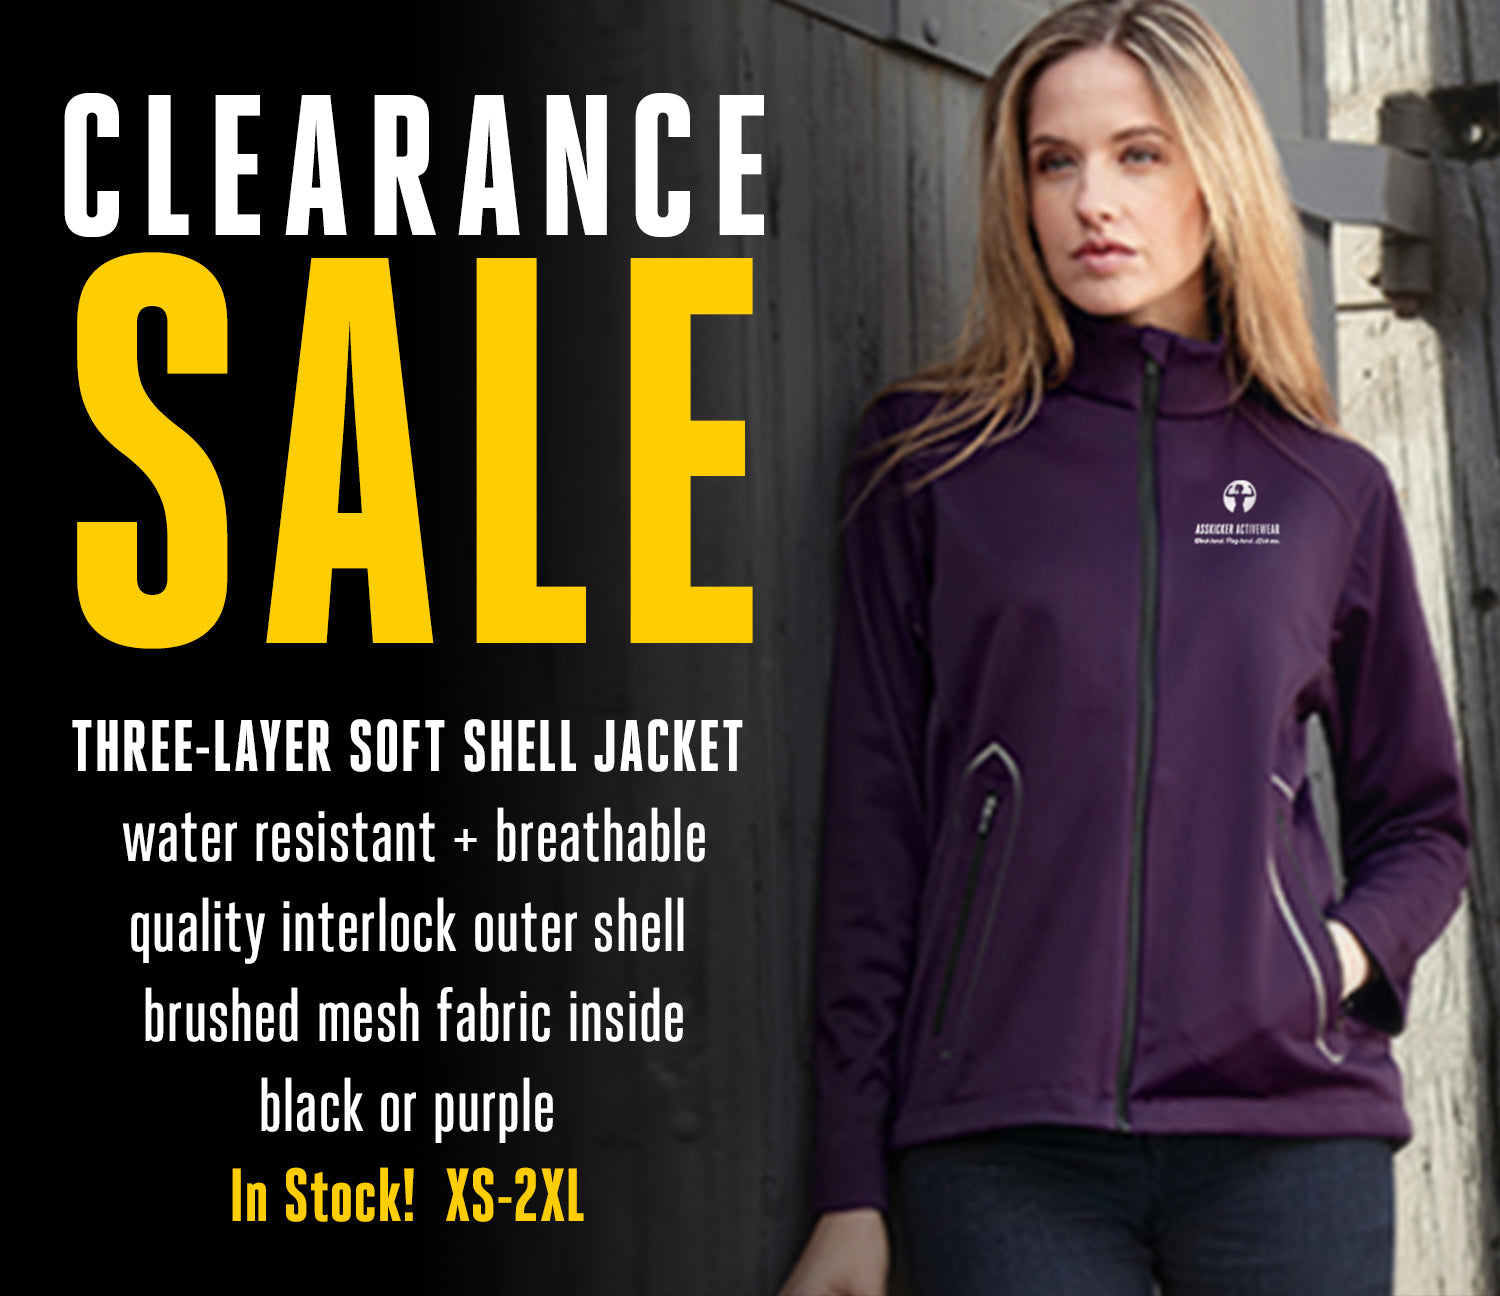 Clearance sale - athleisure, casual apparel for women. Including jackets, tank tops, t-shirts and bottoms.